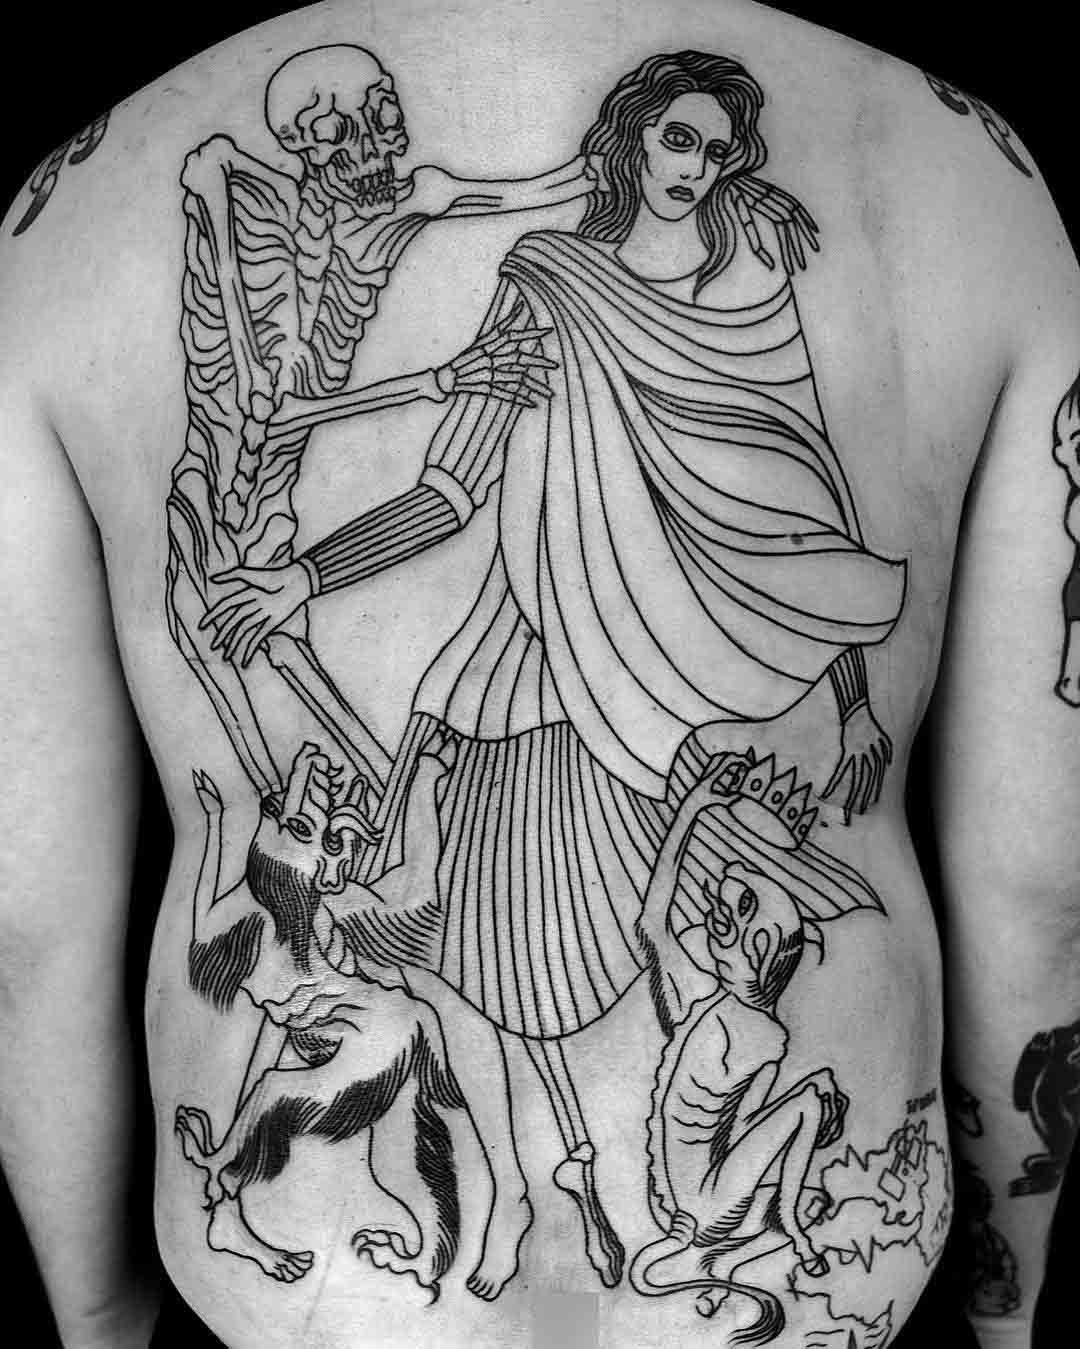 Tattoo art Death tattoo  various elements which can occur in a Death  tattoo